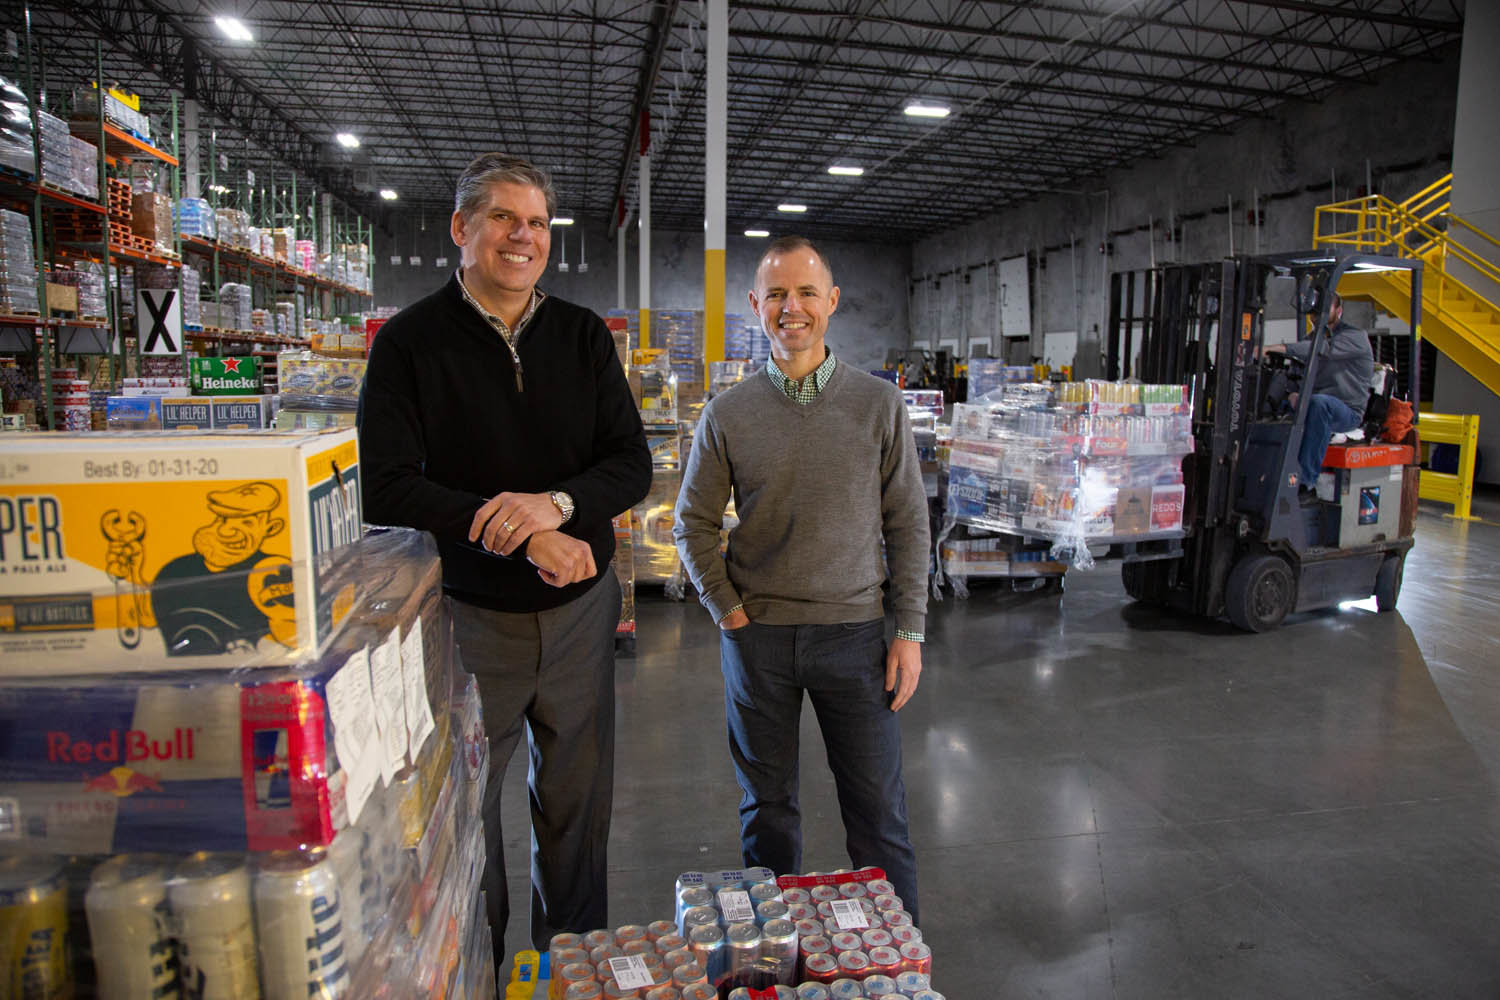 CUE THE BEER: Crews at Heart of America Beverage Co. average 385 deliveries per day, according to co-owners Brian Gelner, left, and Harwood Ferguson.